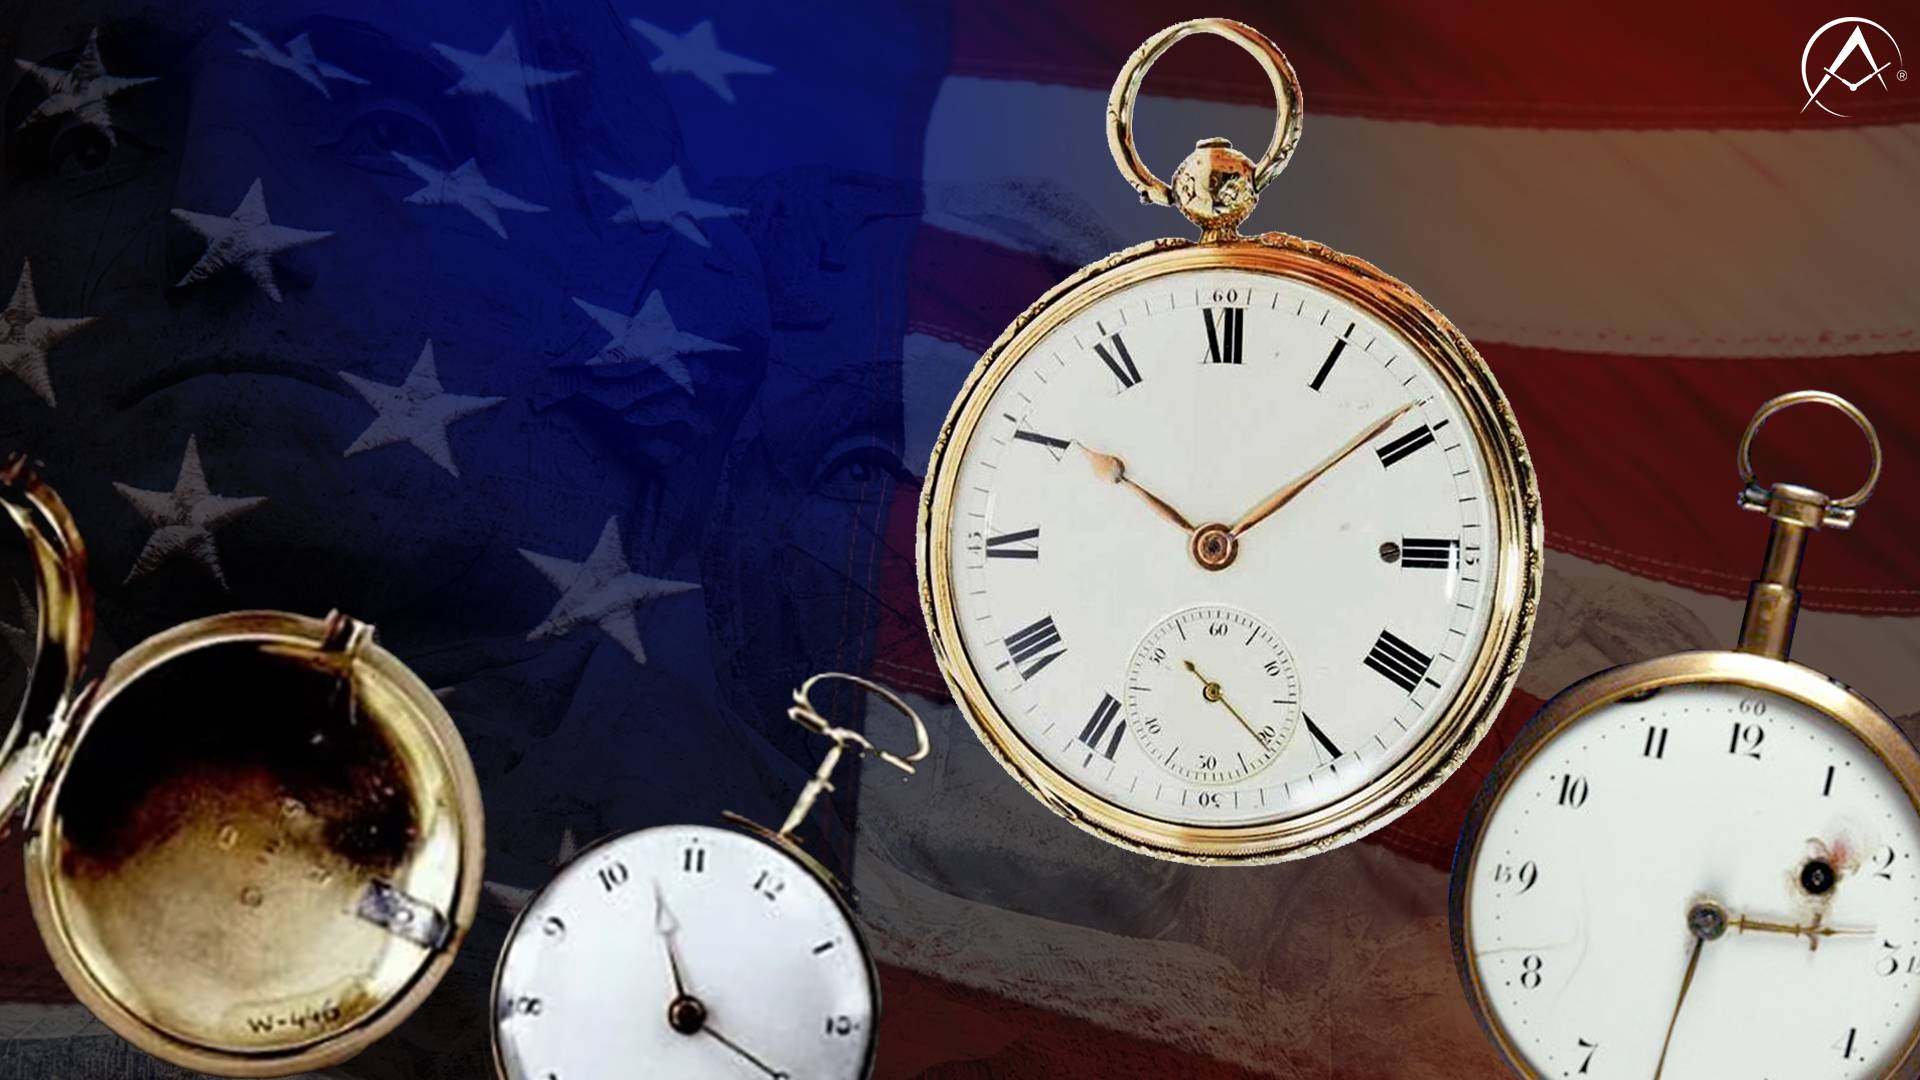 Three Golden Pocket Watches with White Dials Including a James McCabe watch, Jean-Antonine Lepine Watch, and Unknown Swiss Quarter Repeater in Front of an American Flag.